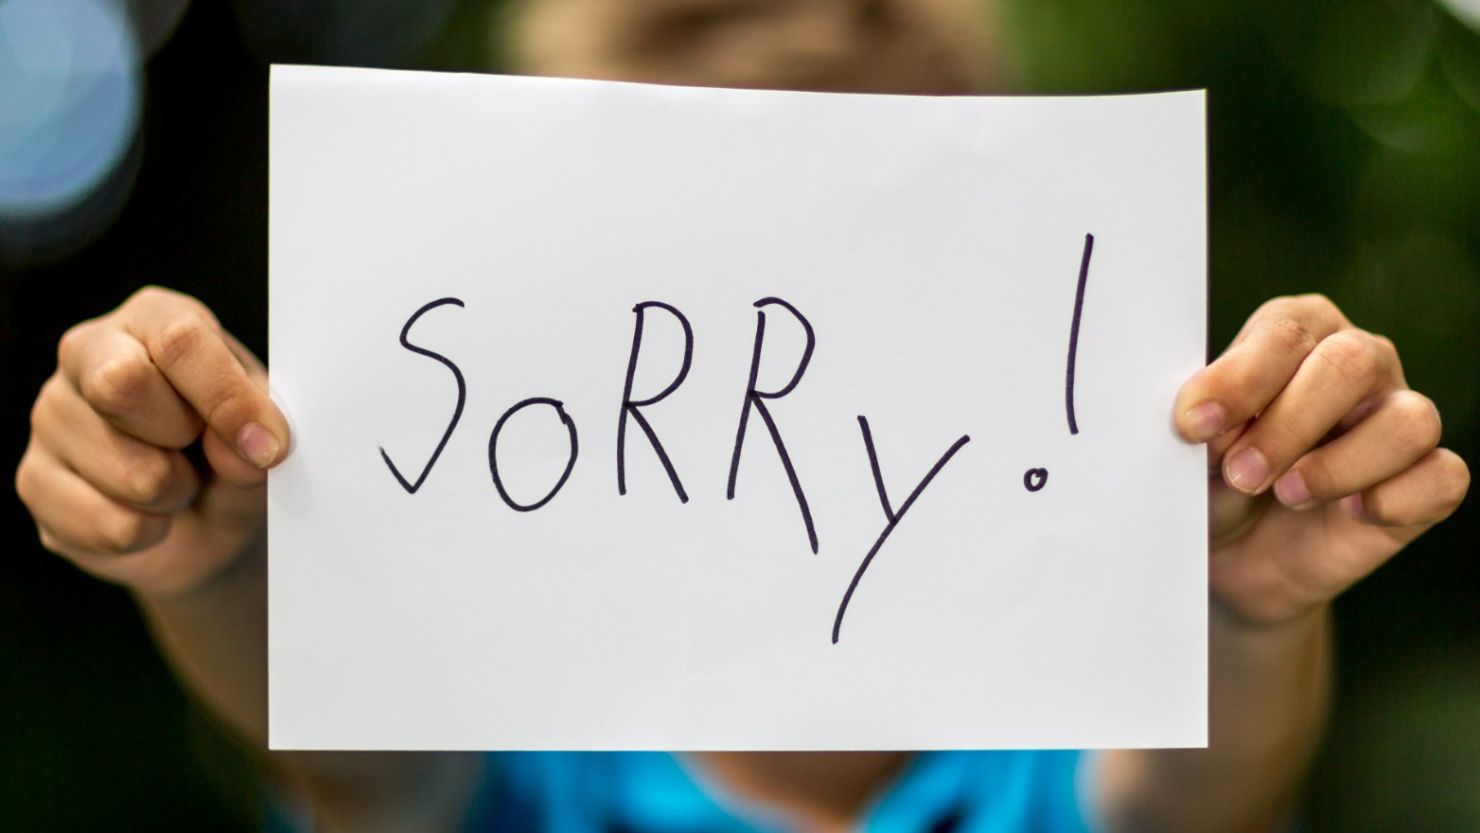 Apologizing with sincerity is hard because pride and shame often get in the way.